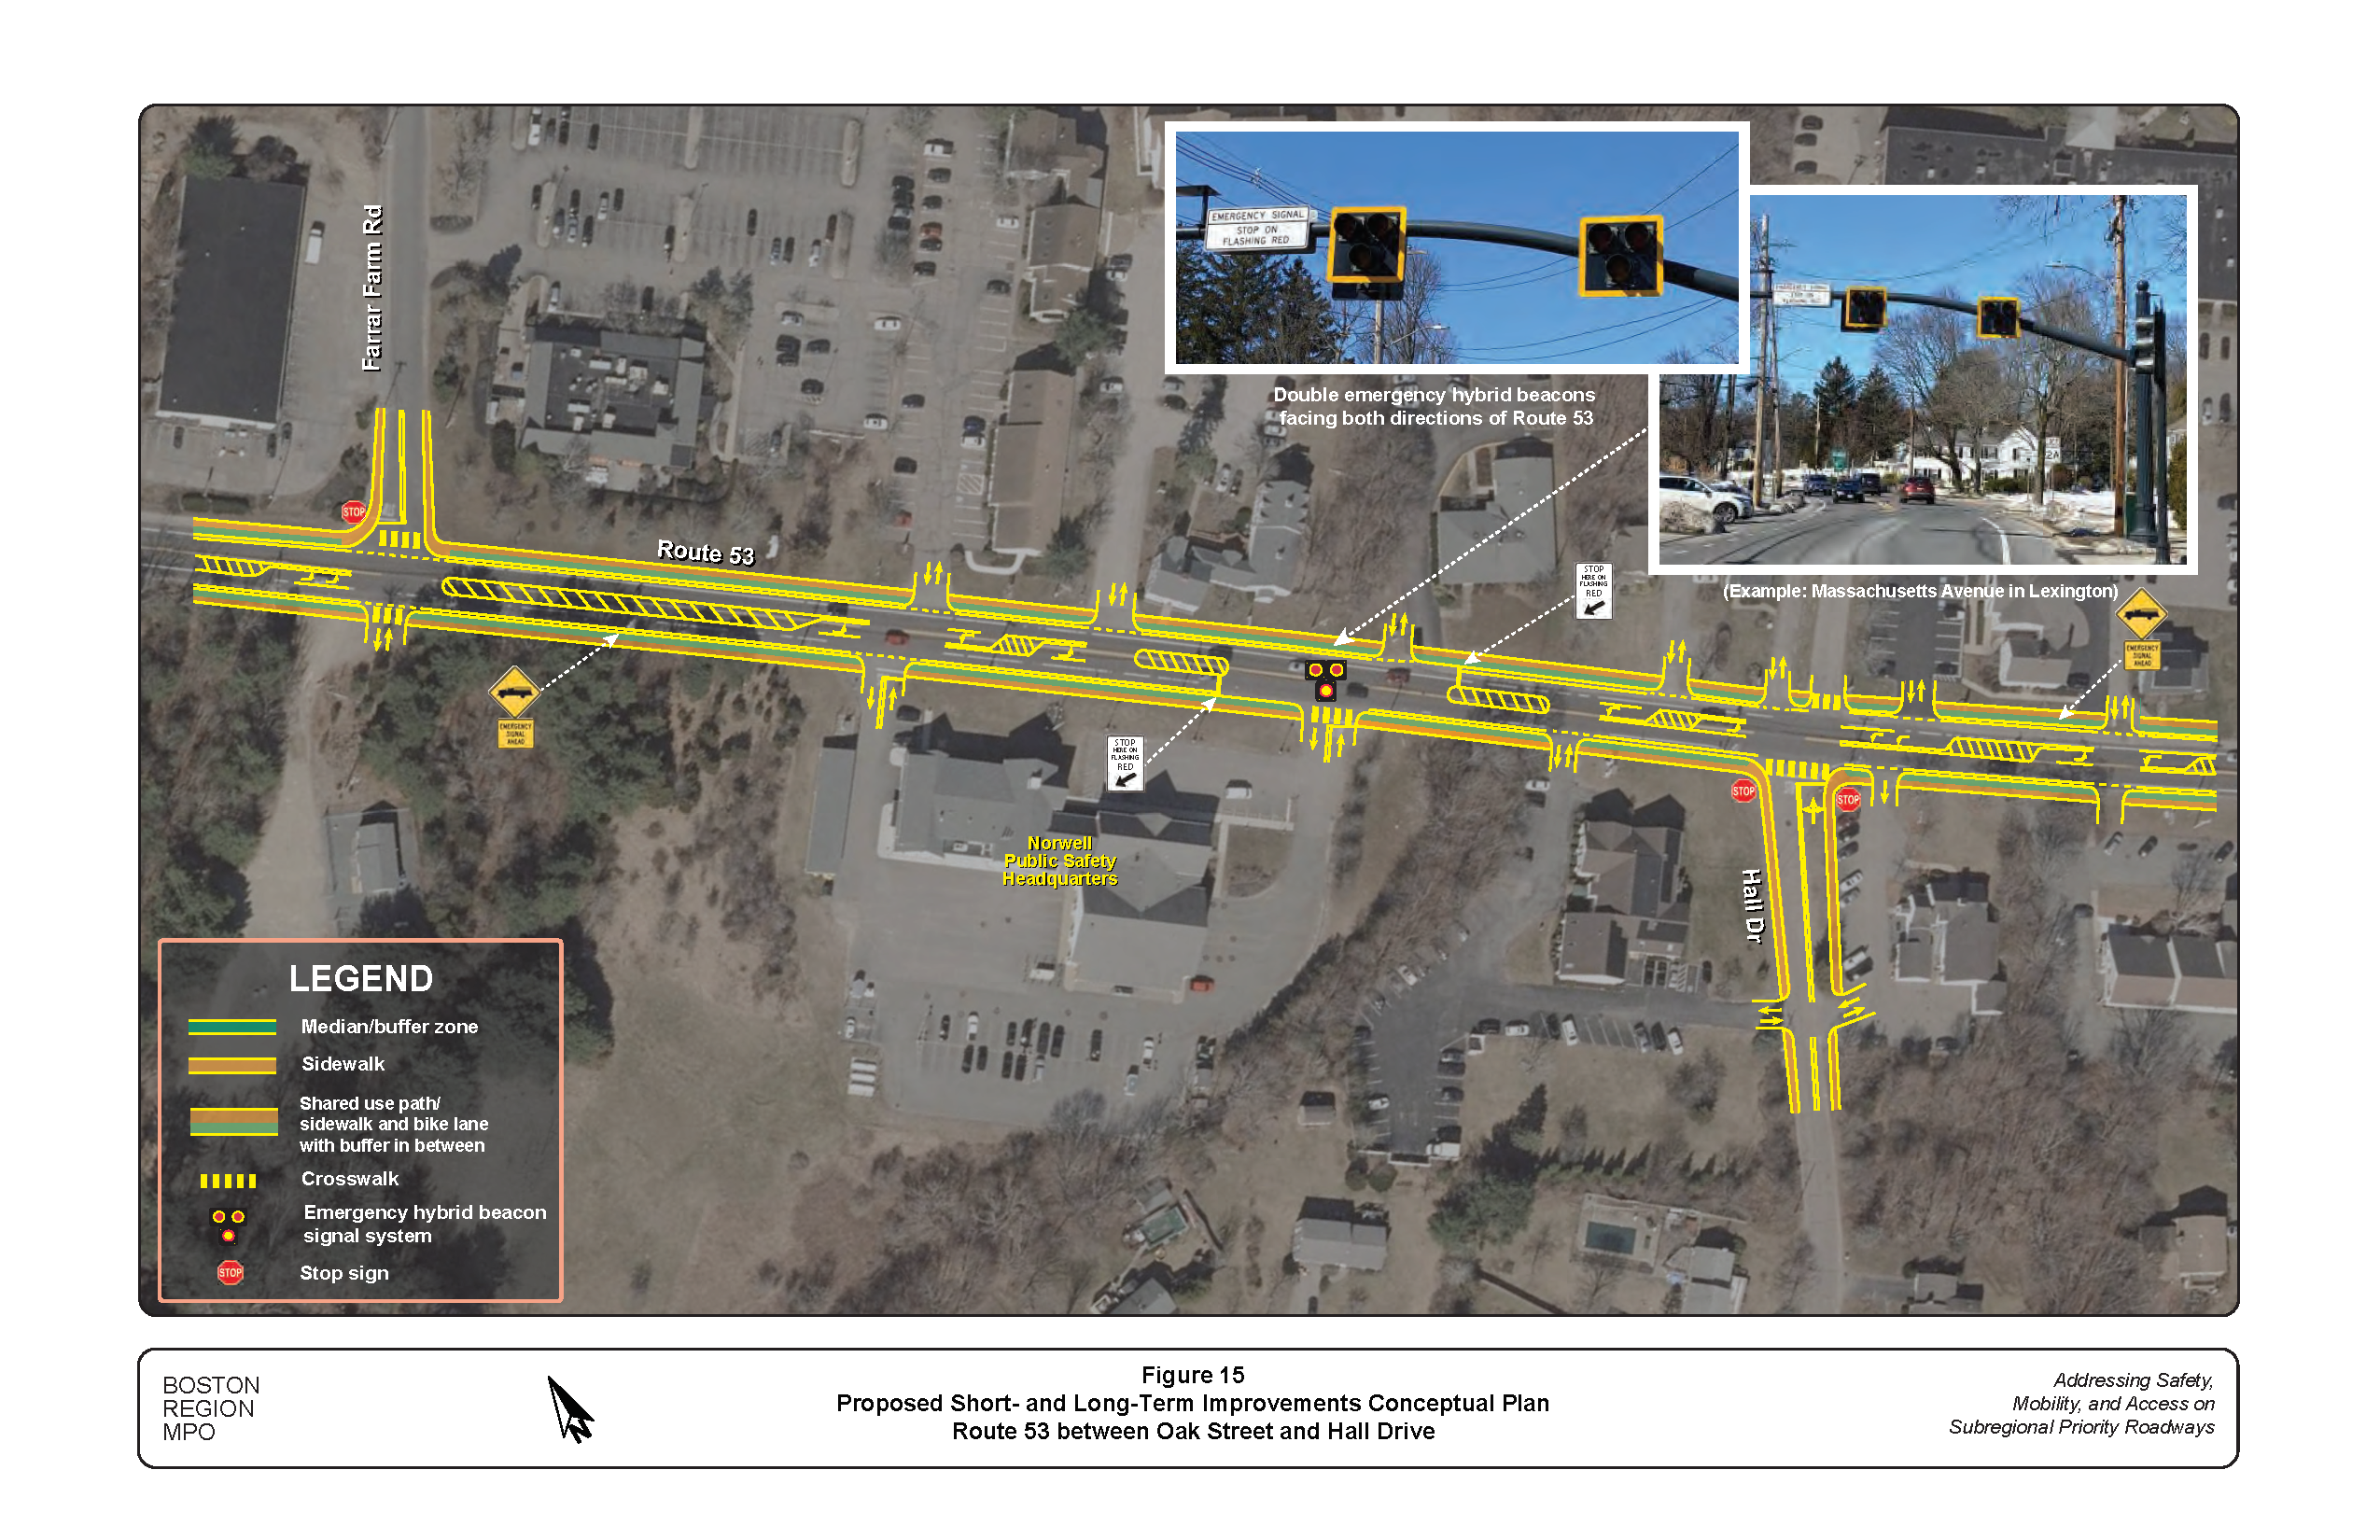 This figure shows a conceptual plan of the proposed short- and long-term improvements in the Route 53 section from Oak Street to Hall Drive.